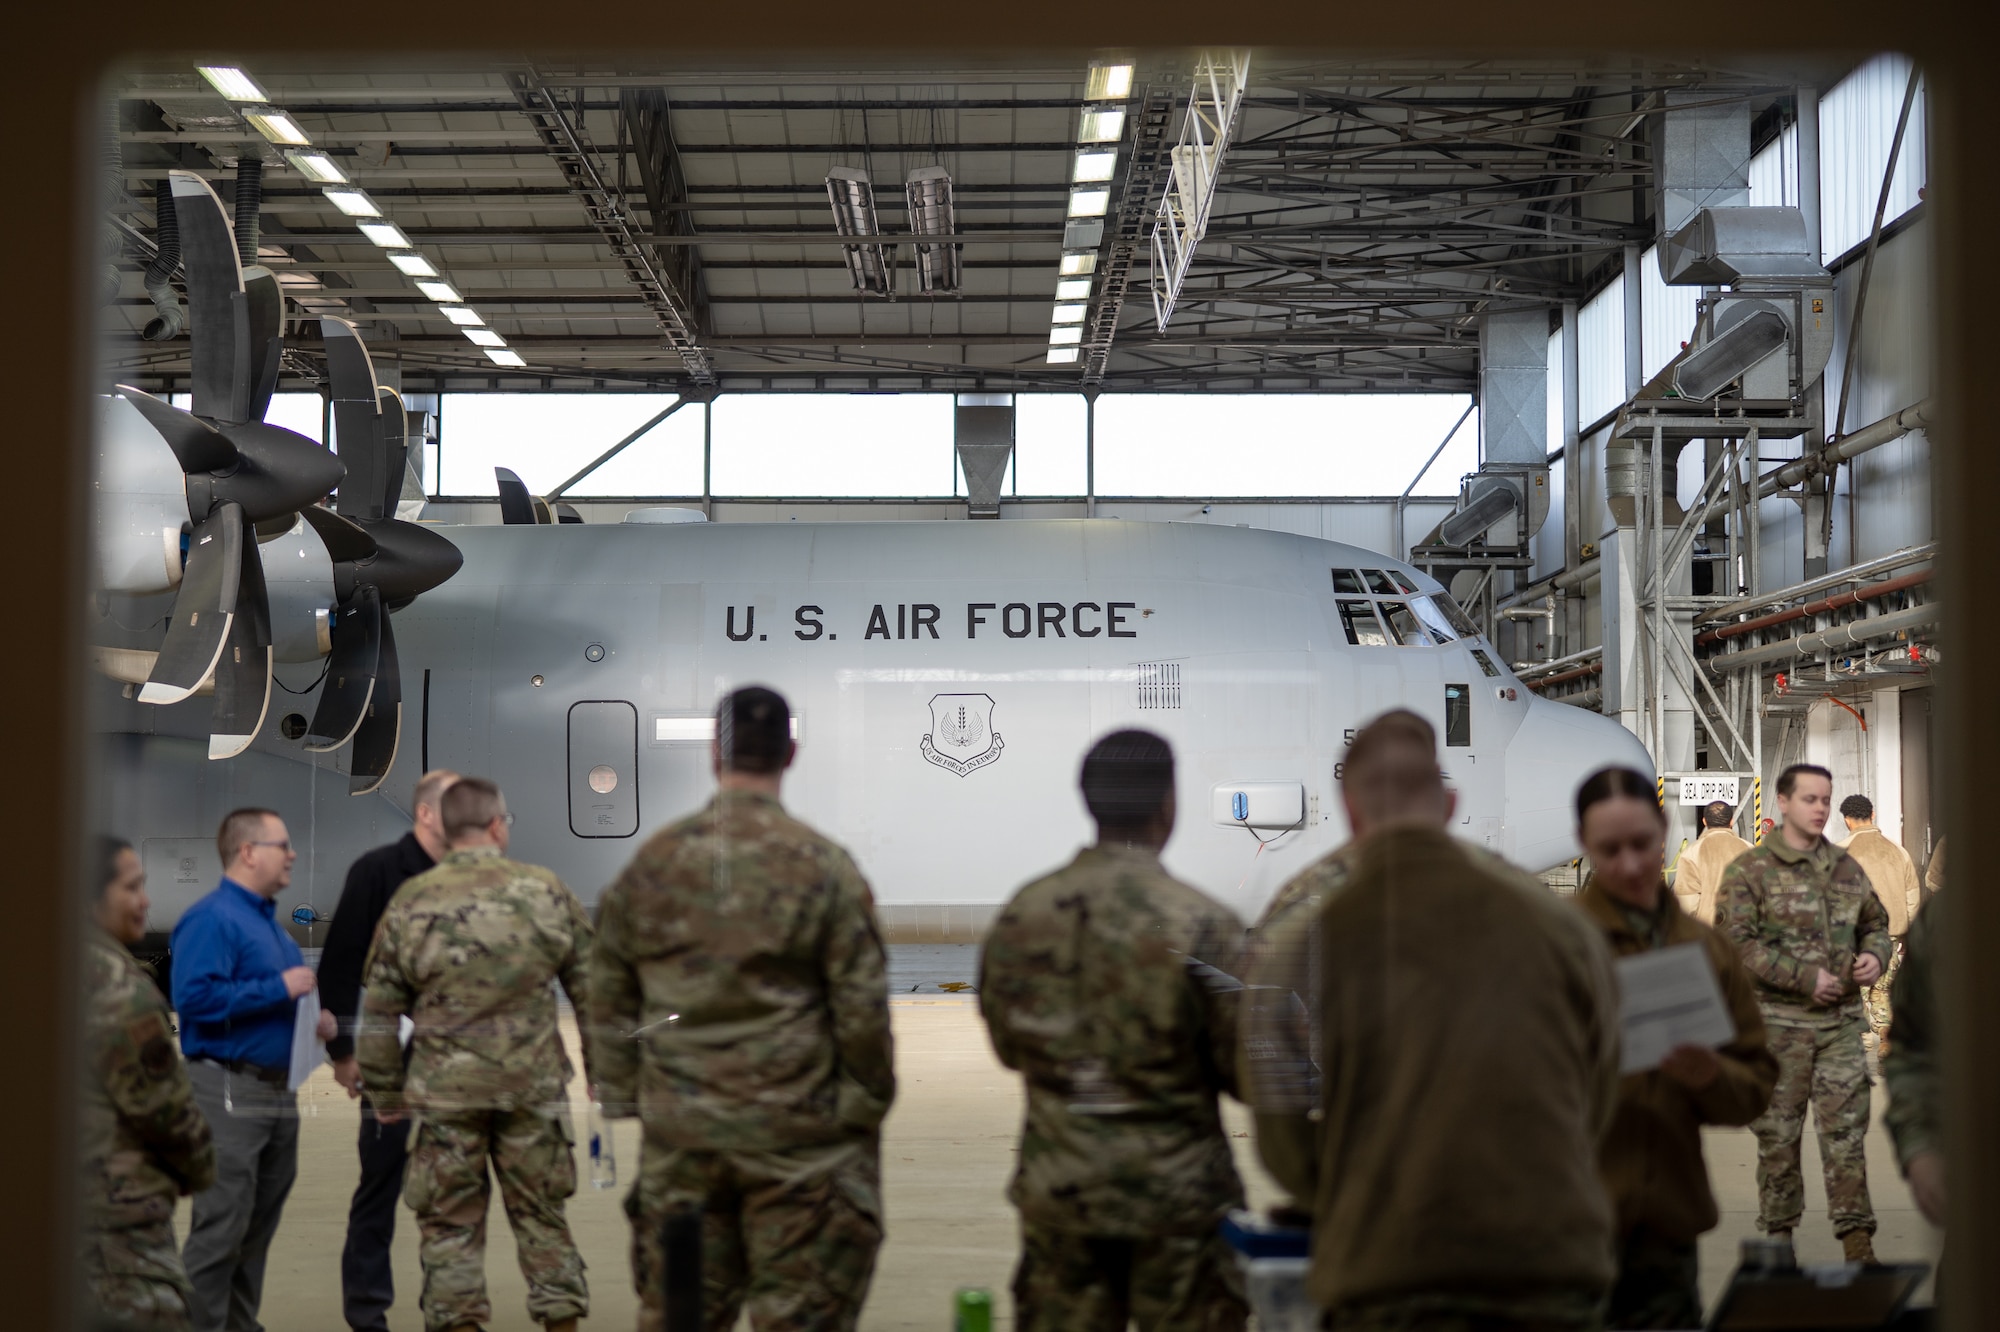 U.S. Air Force Airmen from Ramstein Air Base prepare for exercise Radiant Falcon at Ramstein AB, Germany, March 16, 2023.